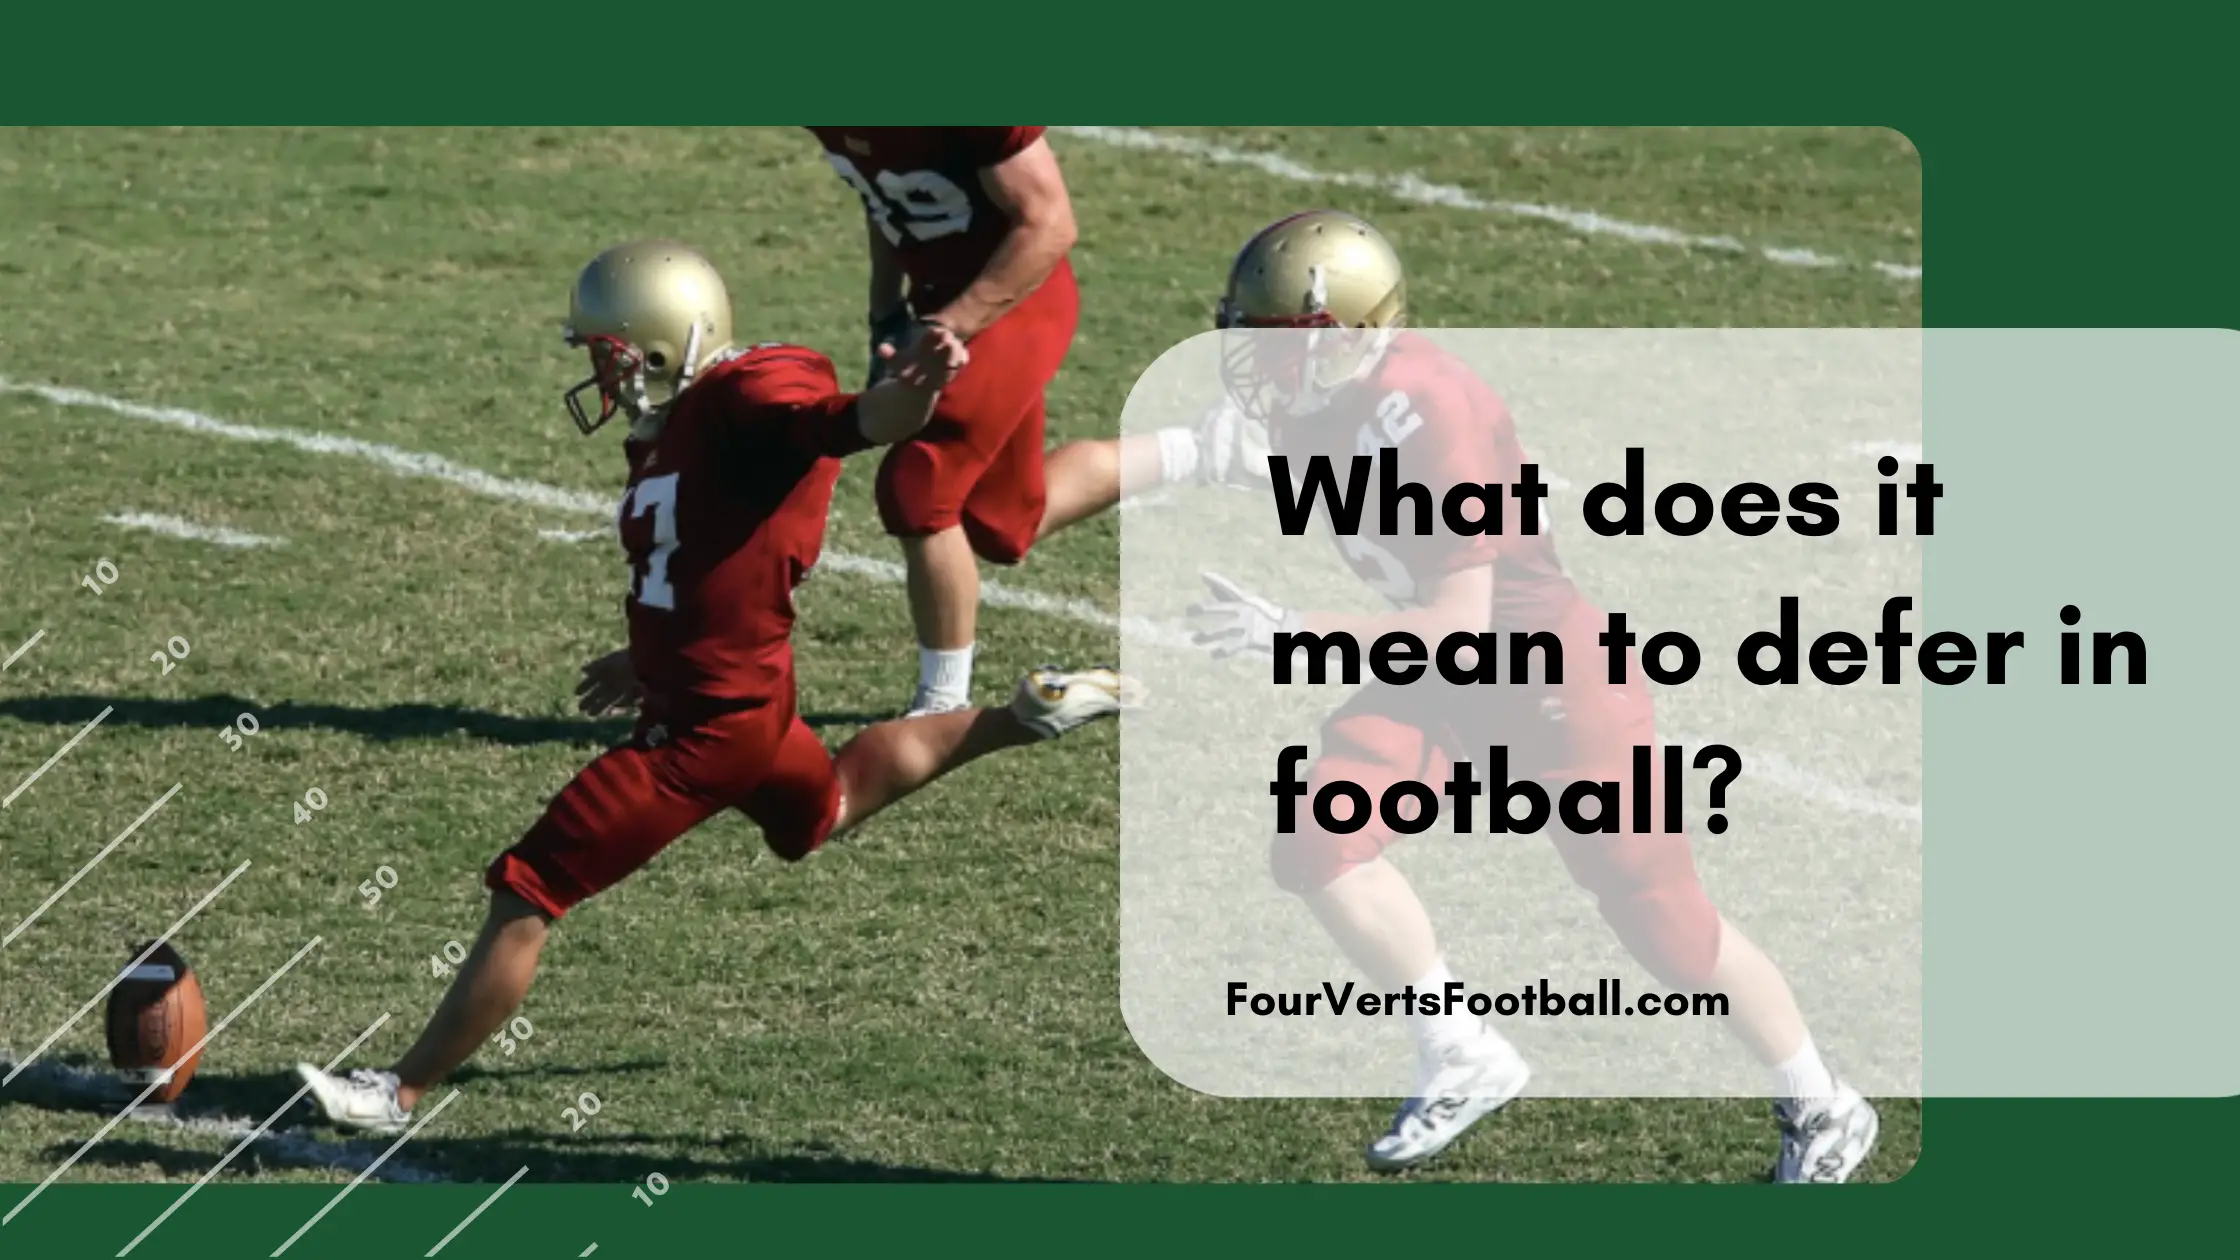 What Does Defer Mean In Football?